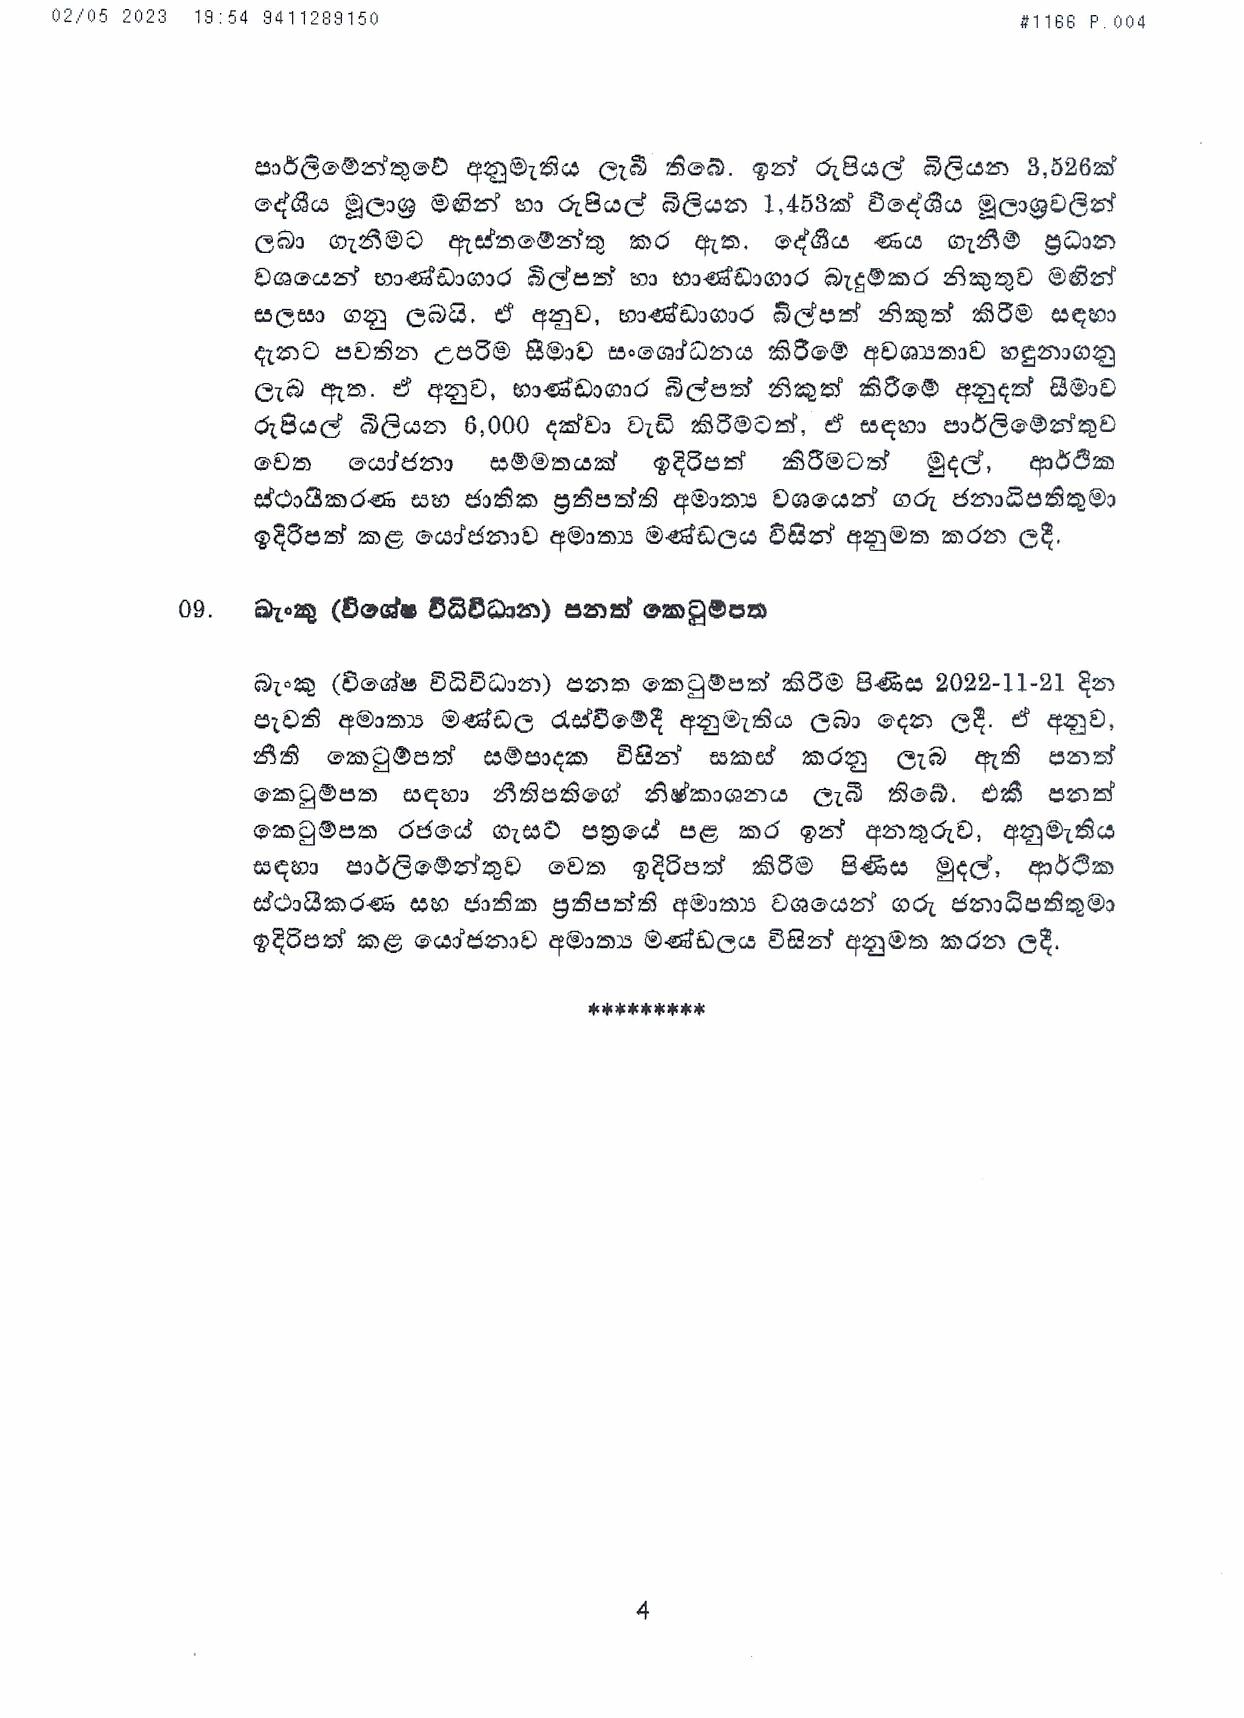 Cabinet Decisions on 02.05.2023 page 004